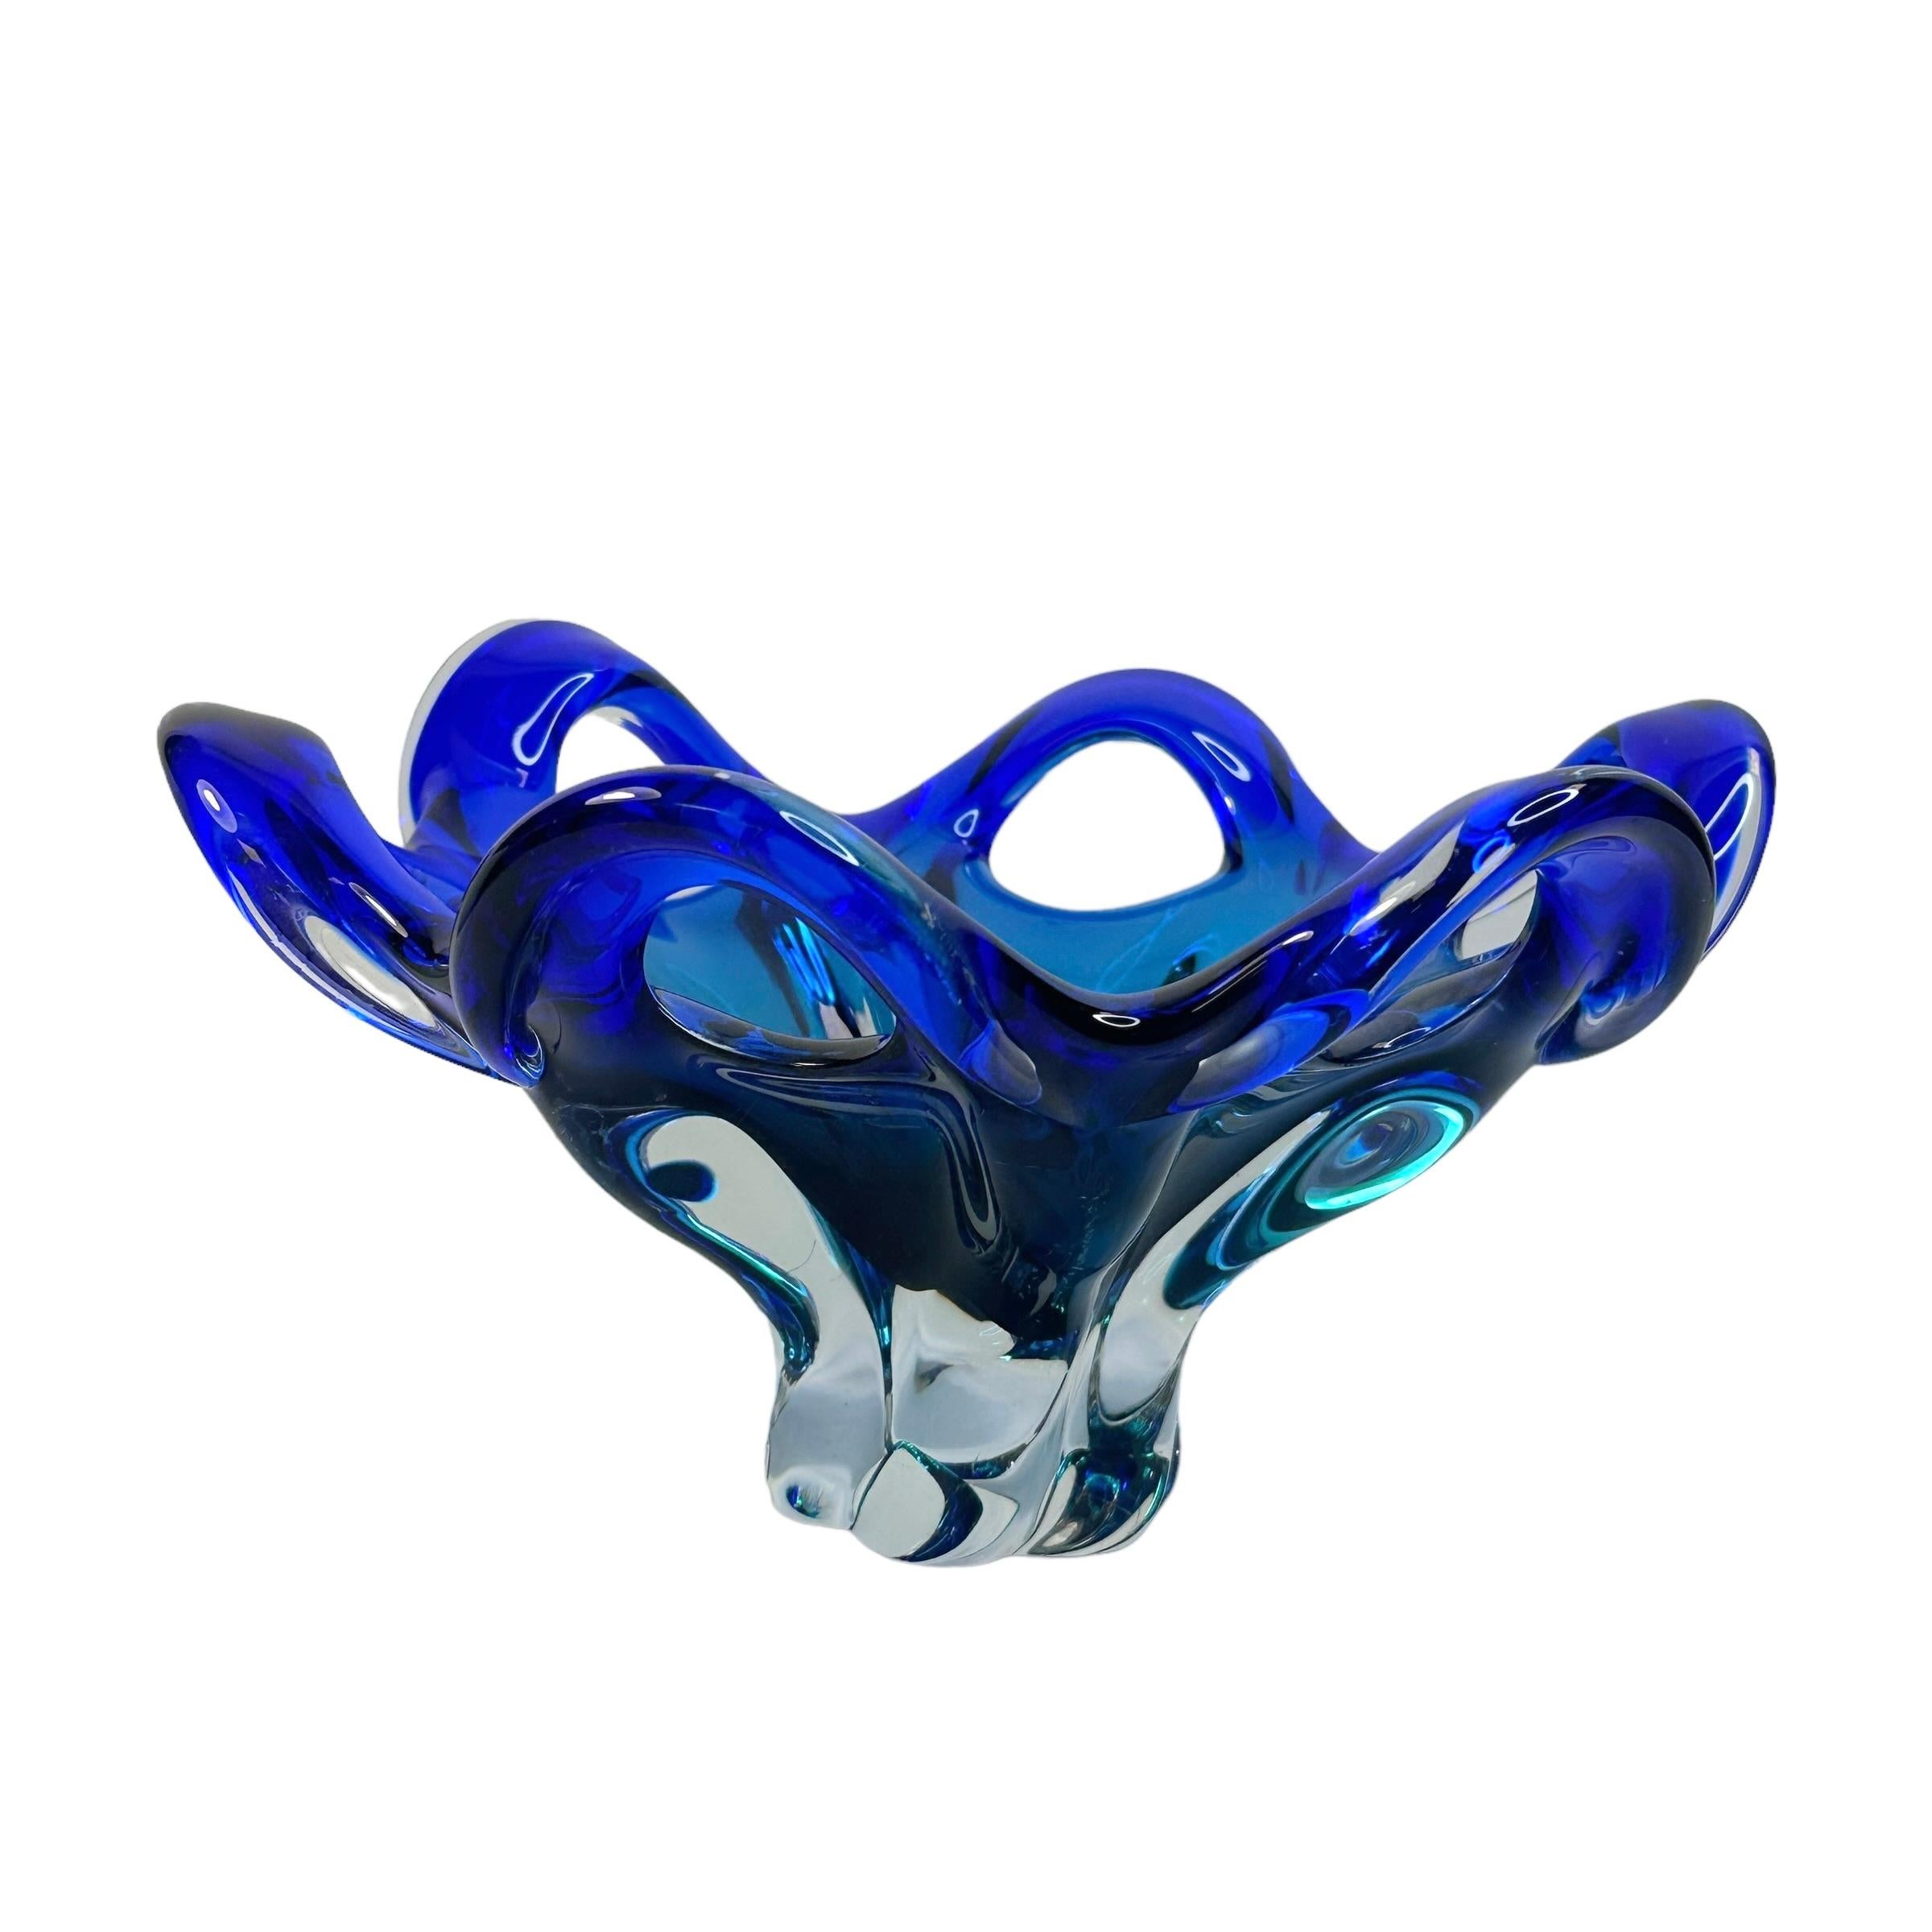 Mid-Century Modern Stunning Murano Art Glass Bowl Catchall Blue and Clear, Vintage, Italy, 1970s For Sale